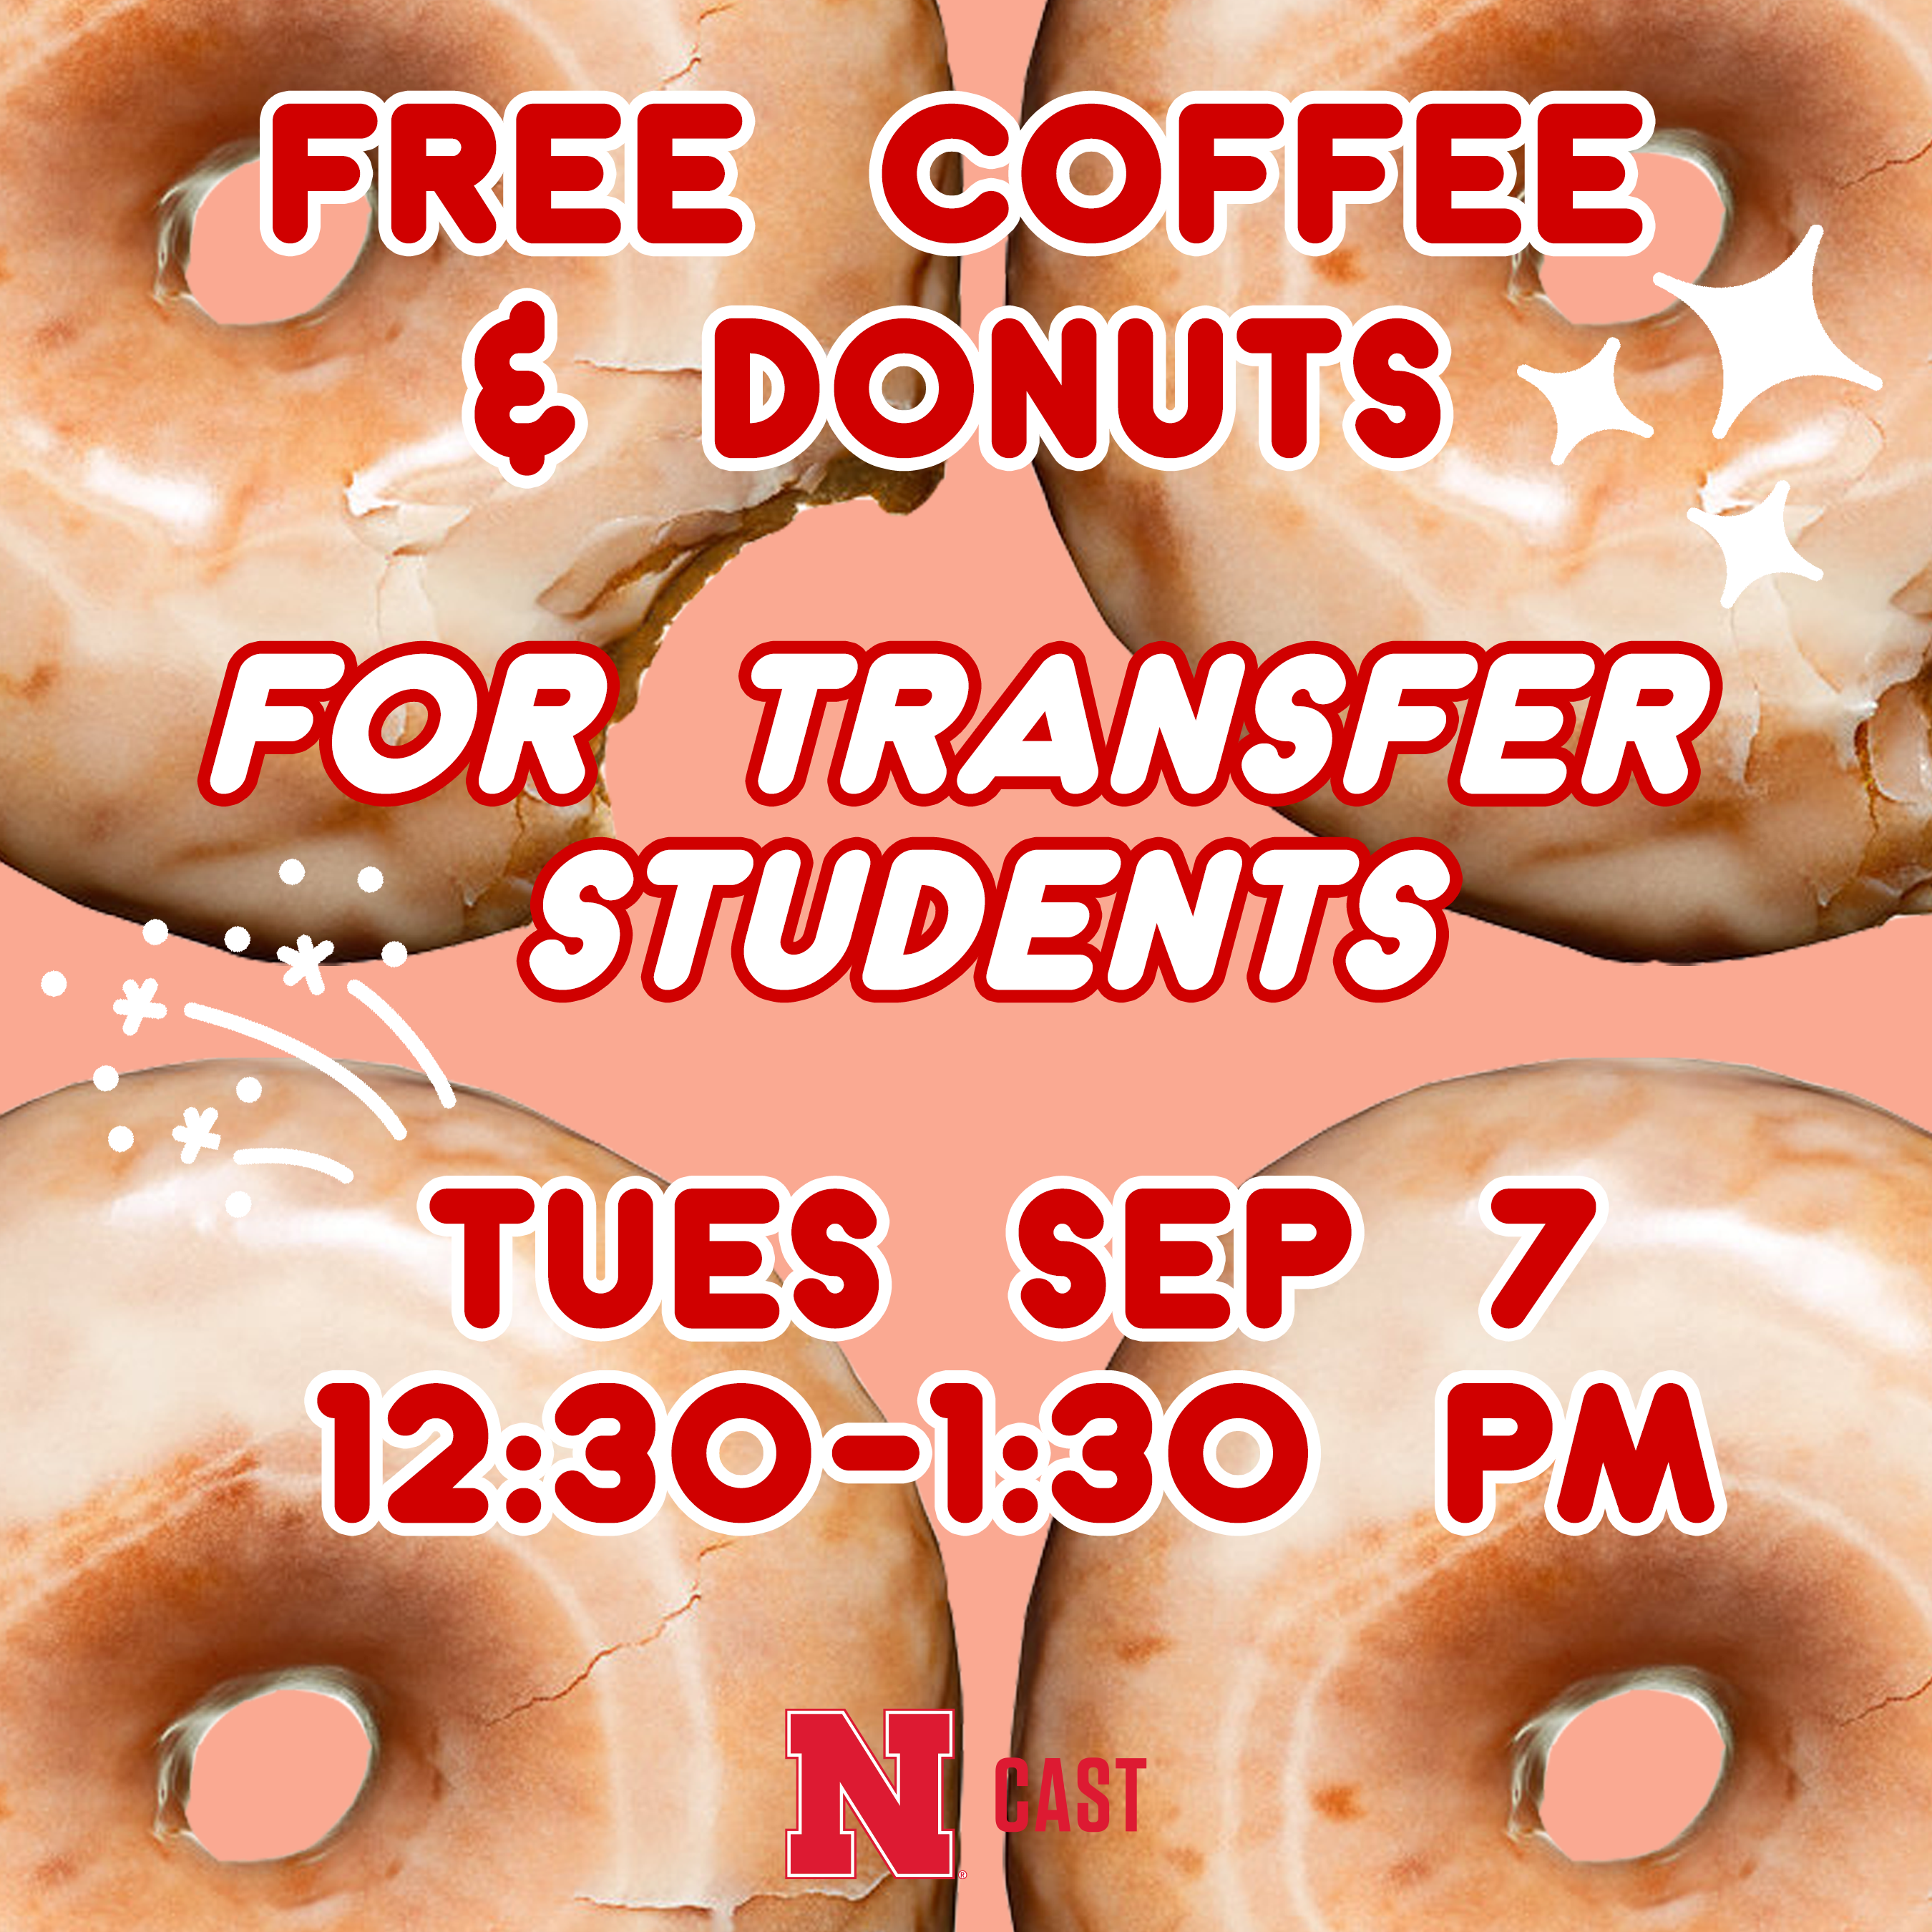 FREE Coffee and Donuts for Transfer Students!